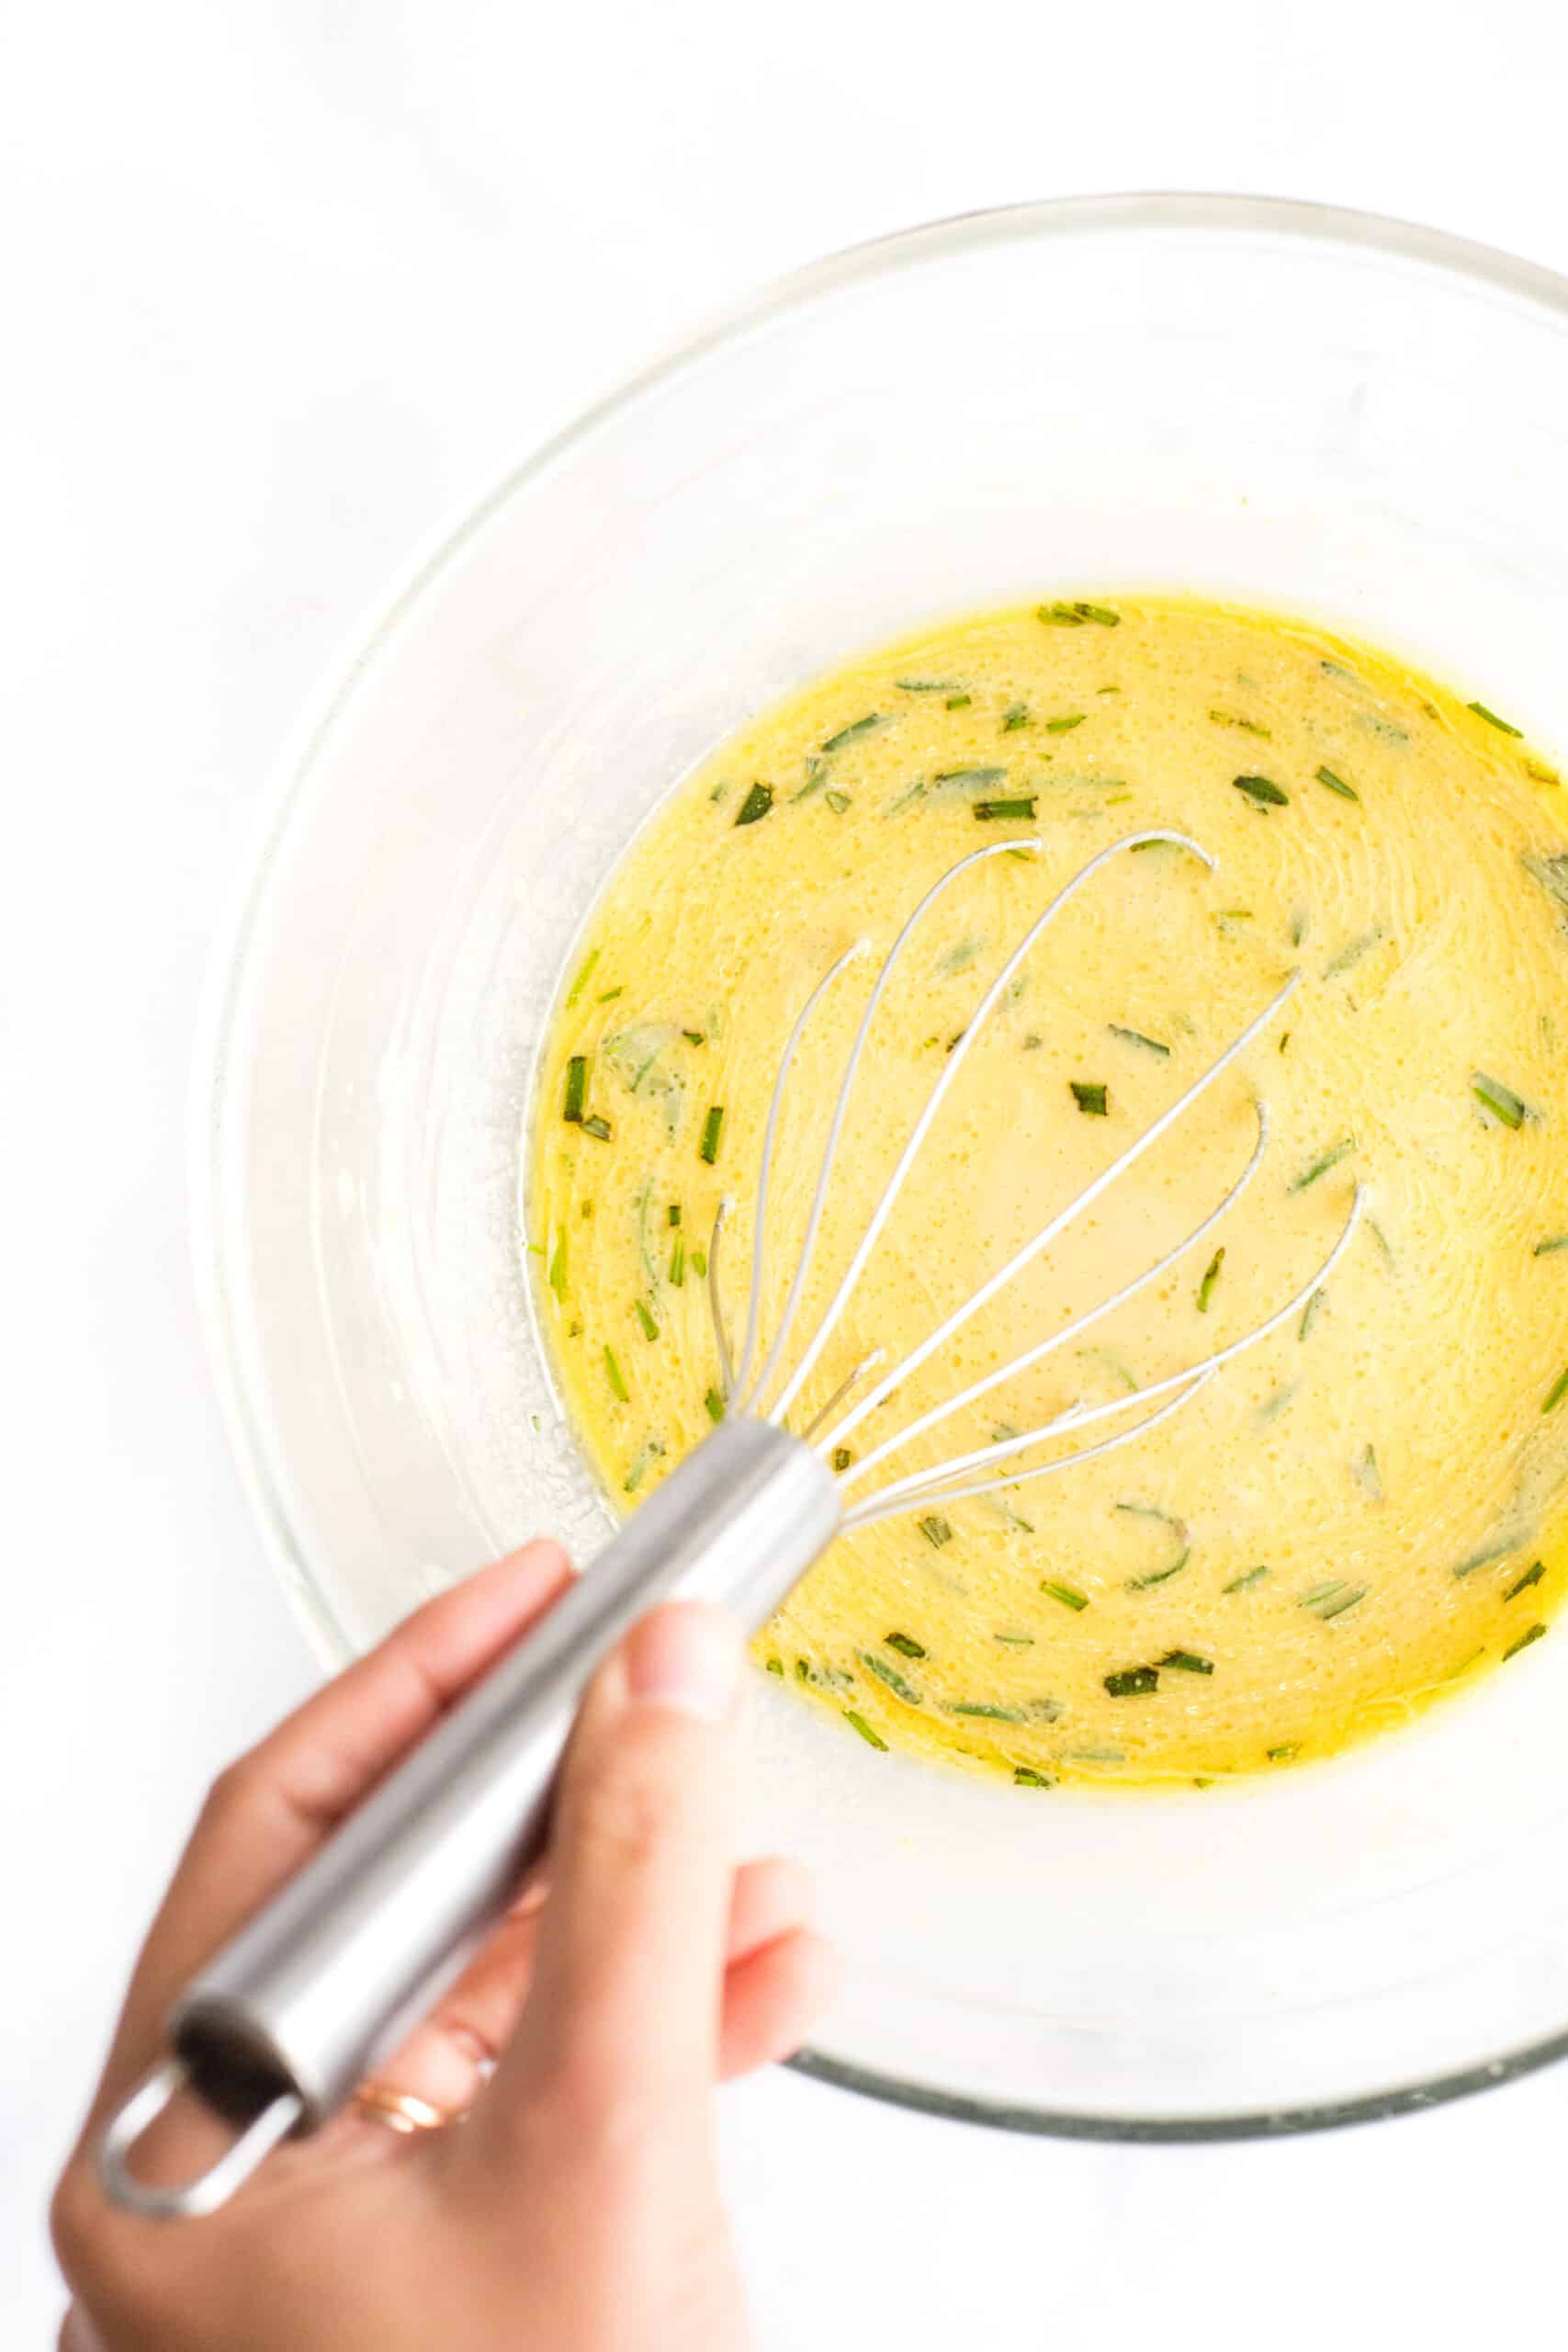 Whisking a yellow mixture in a glass bowl.